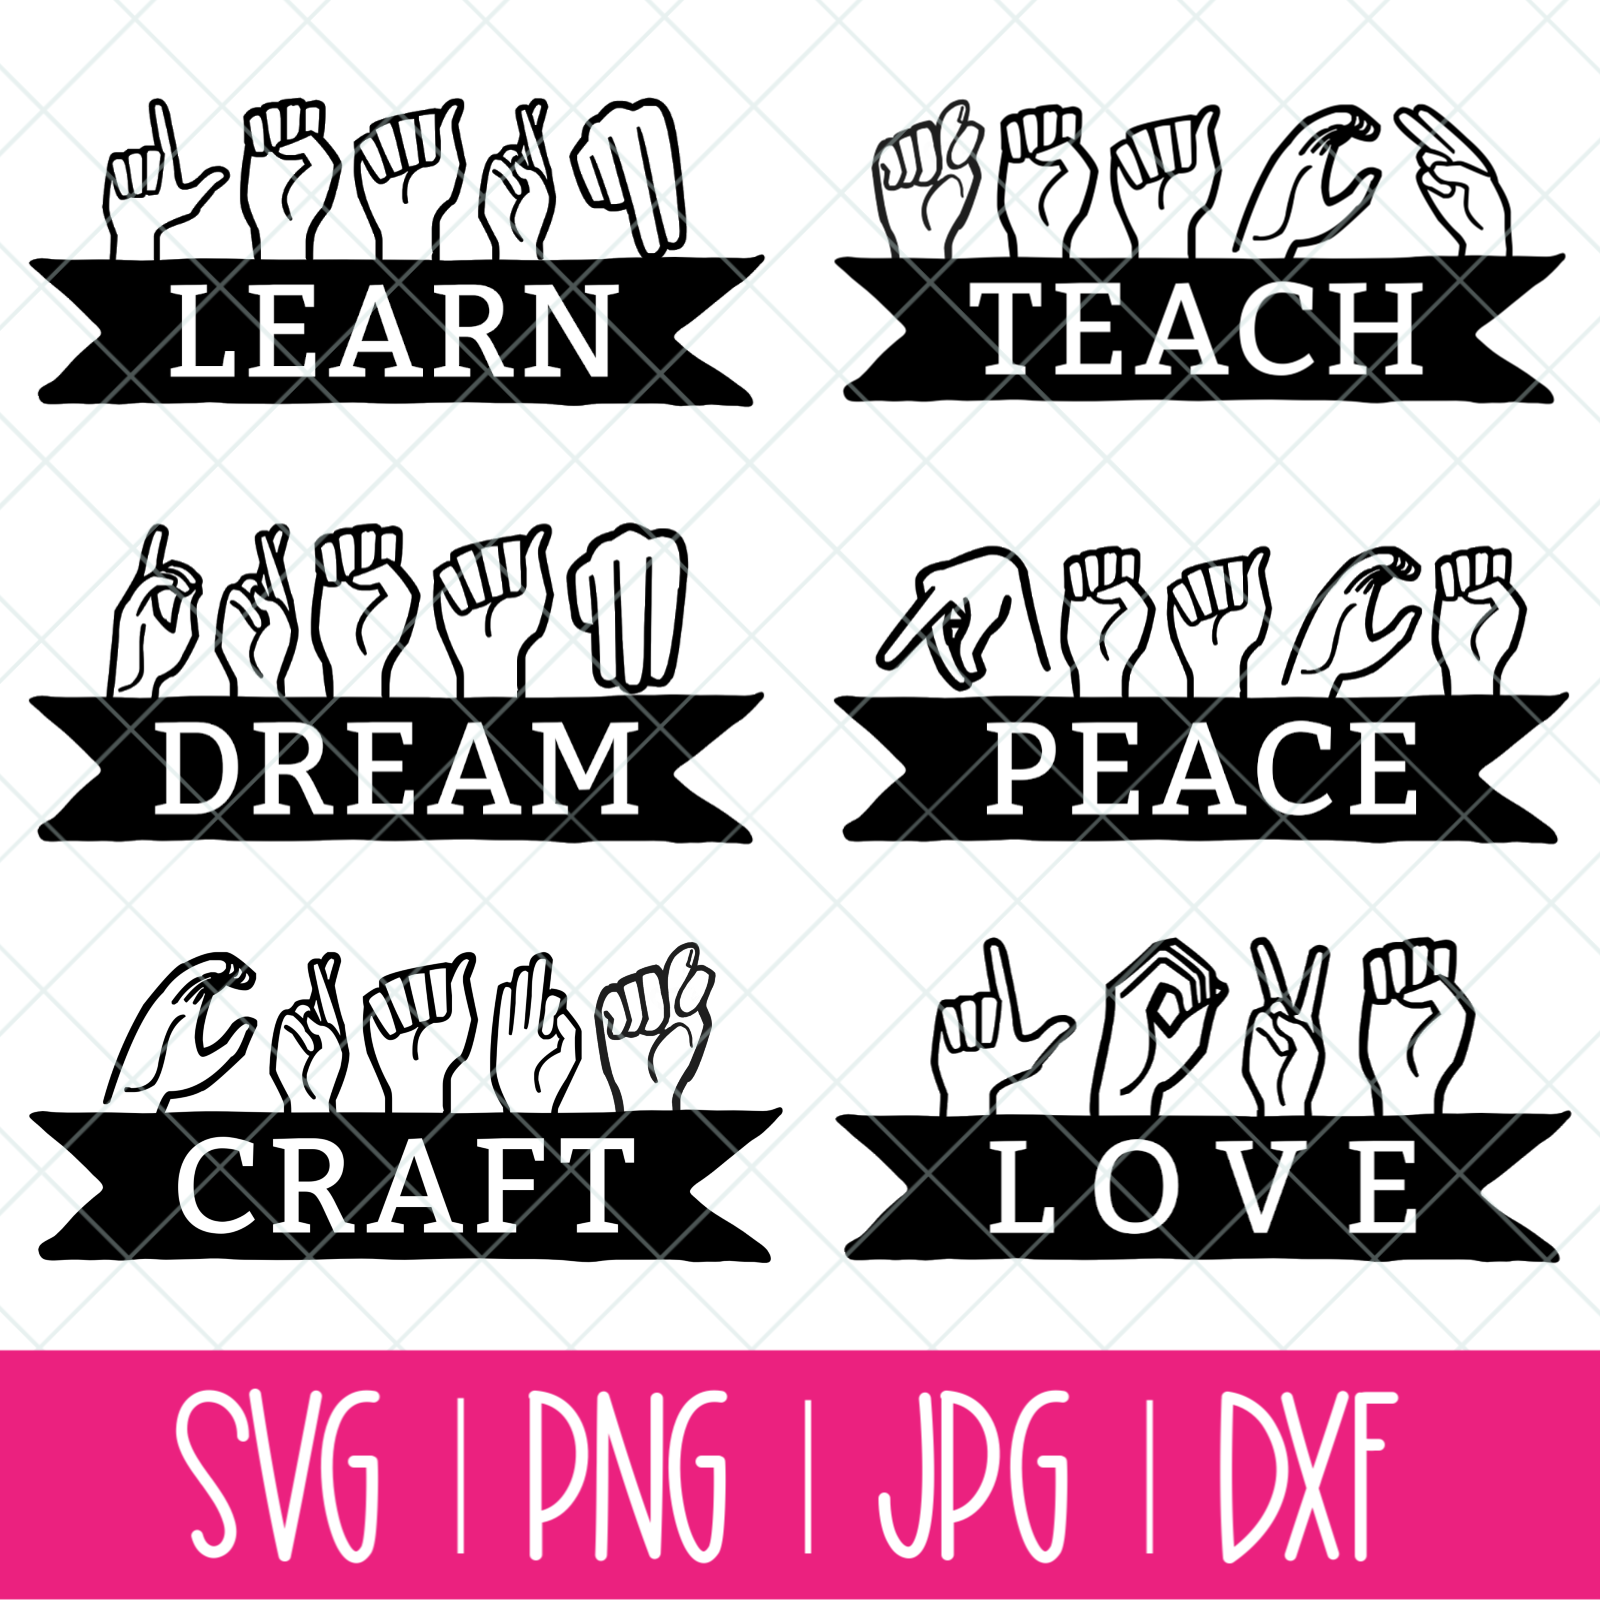 Free Free 157 I Whale Always Love You Svg SVG PNG EPS DXF File